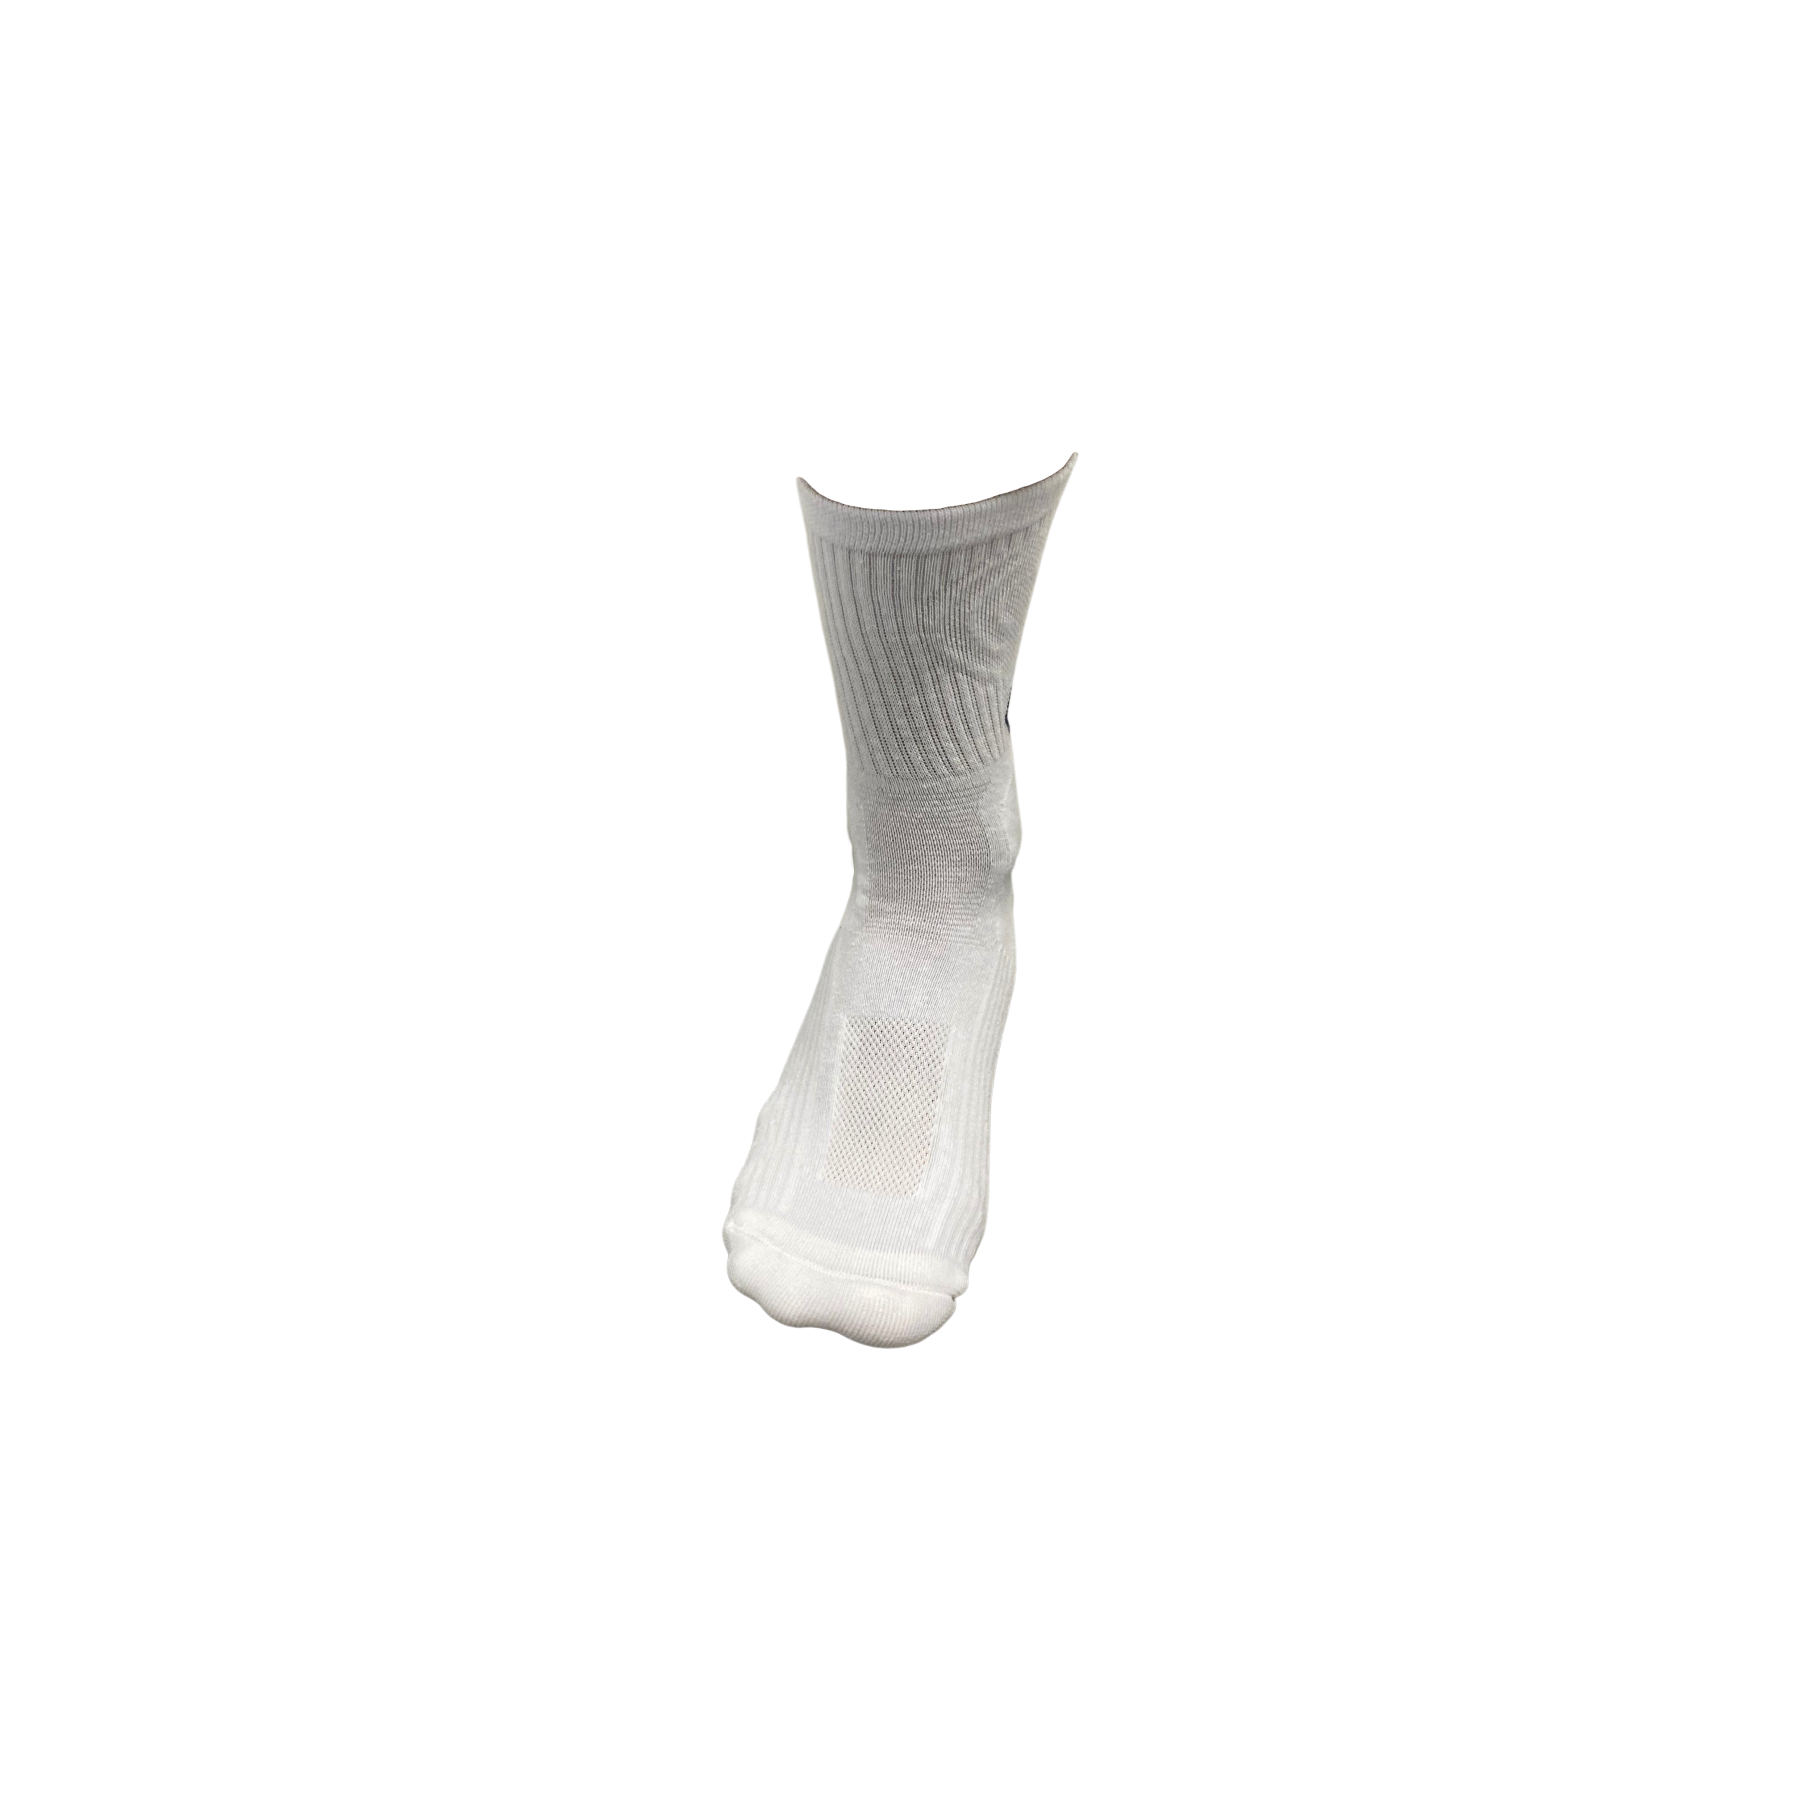 Chaussettes Errea France Volley Skip AD